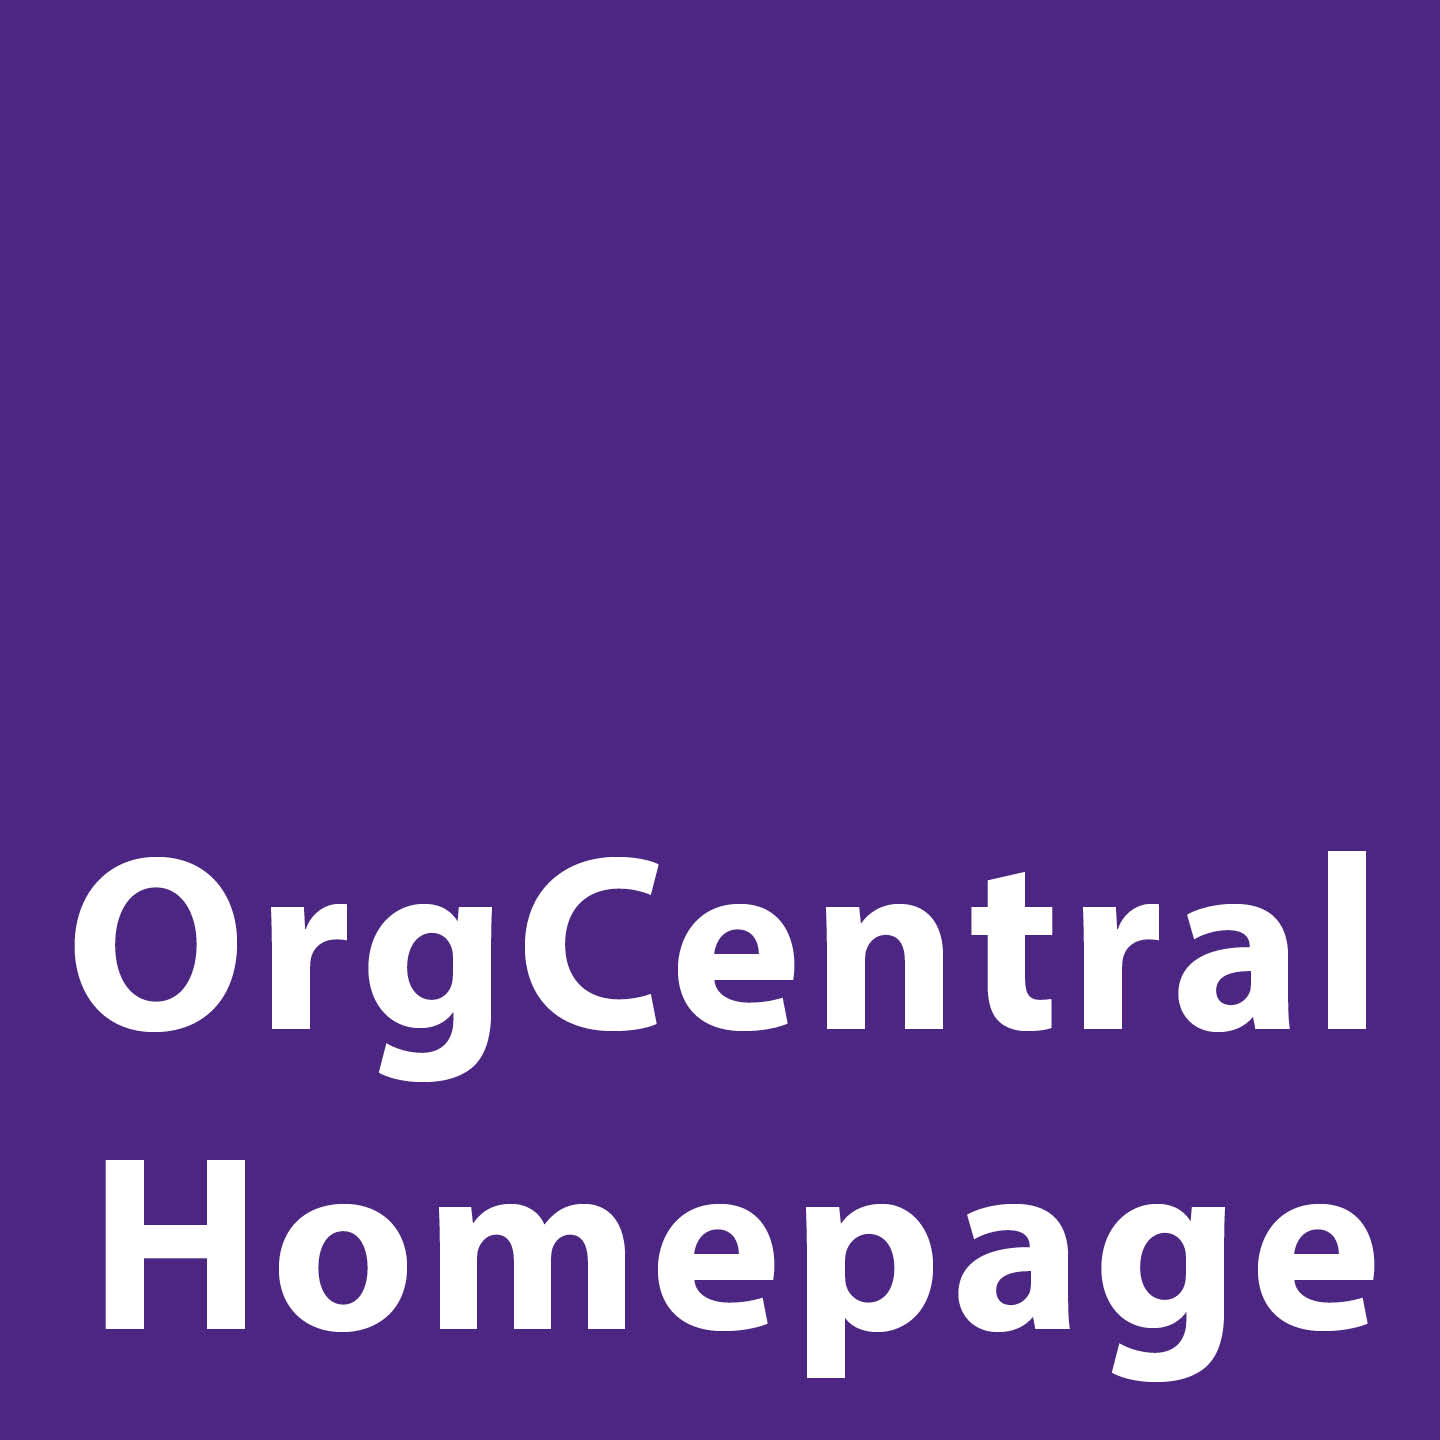 OrgCentral Homepage